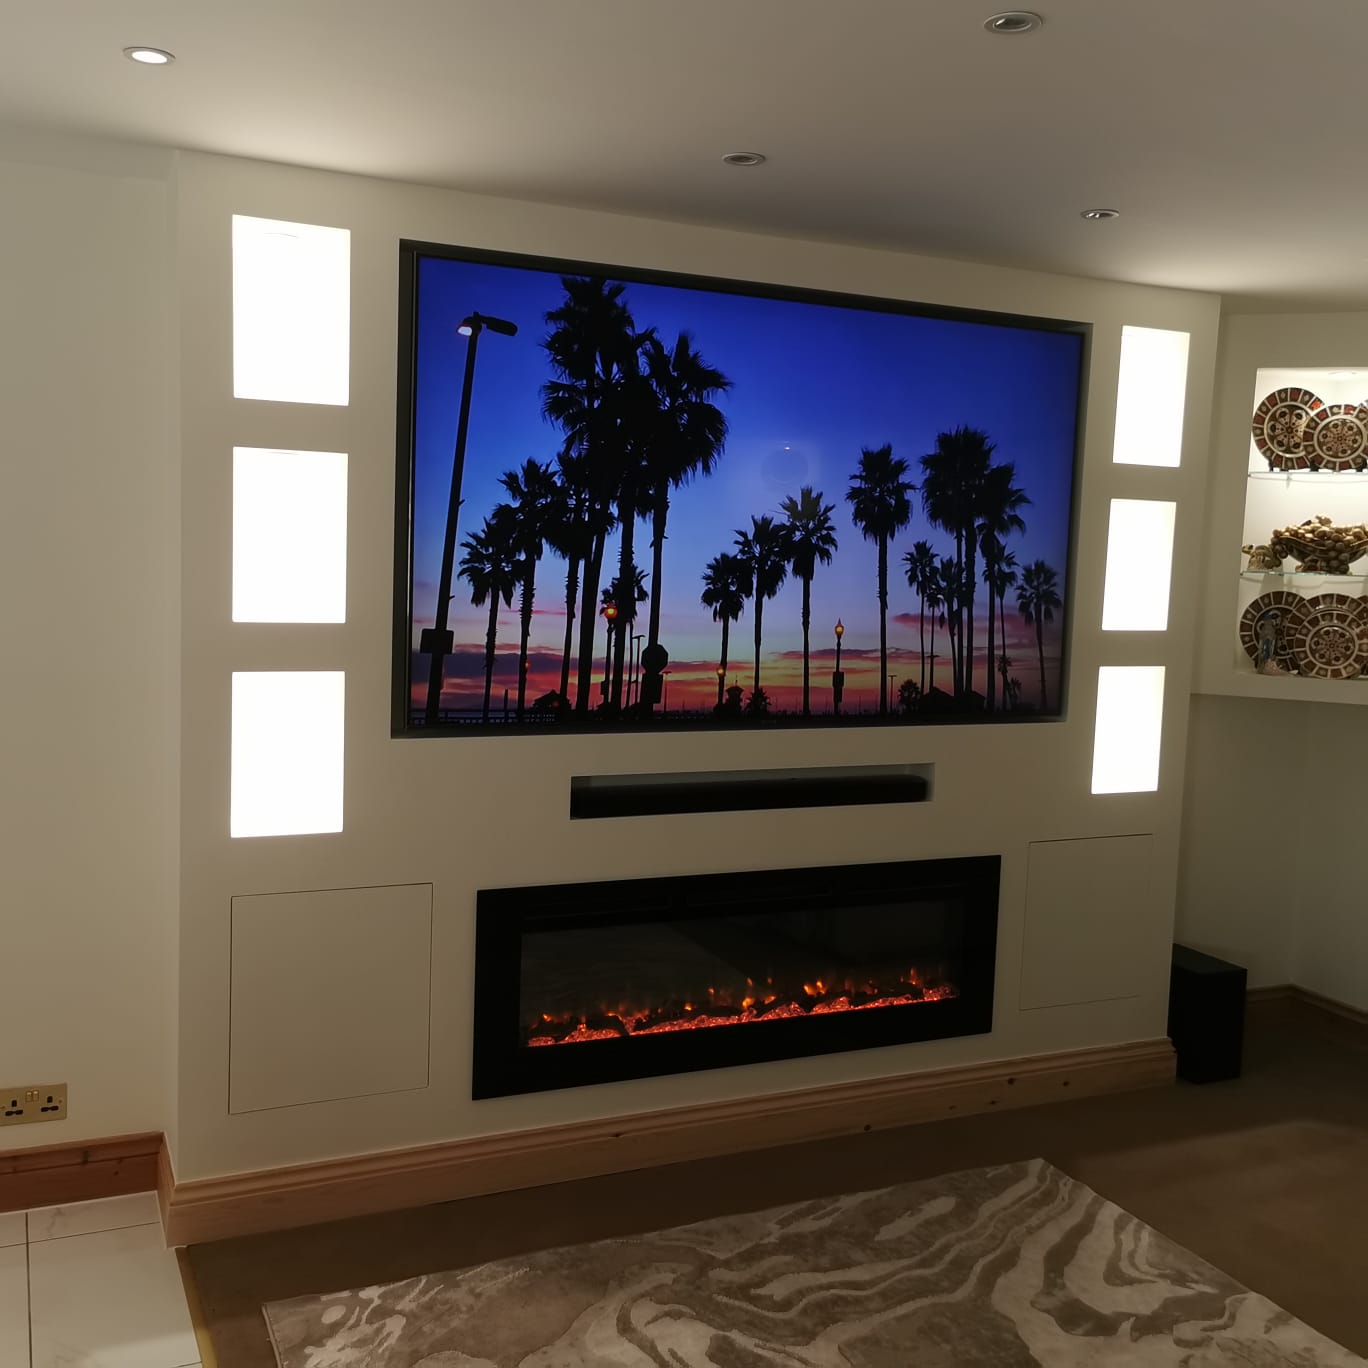 London, Stratford - Media Wall & Soundbar and Fireplace Installation by DEAL